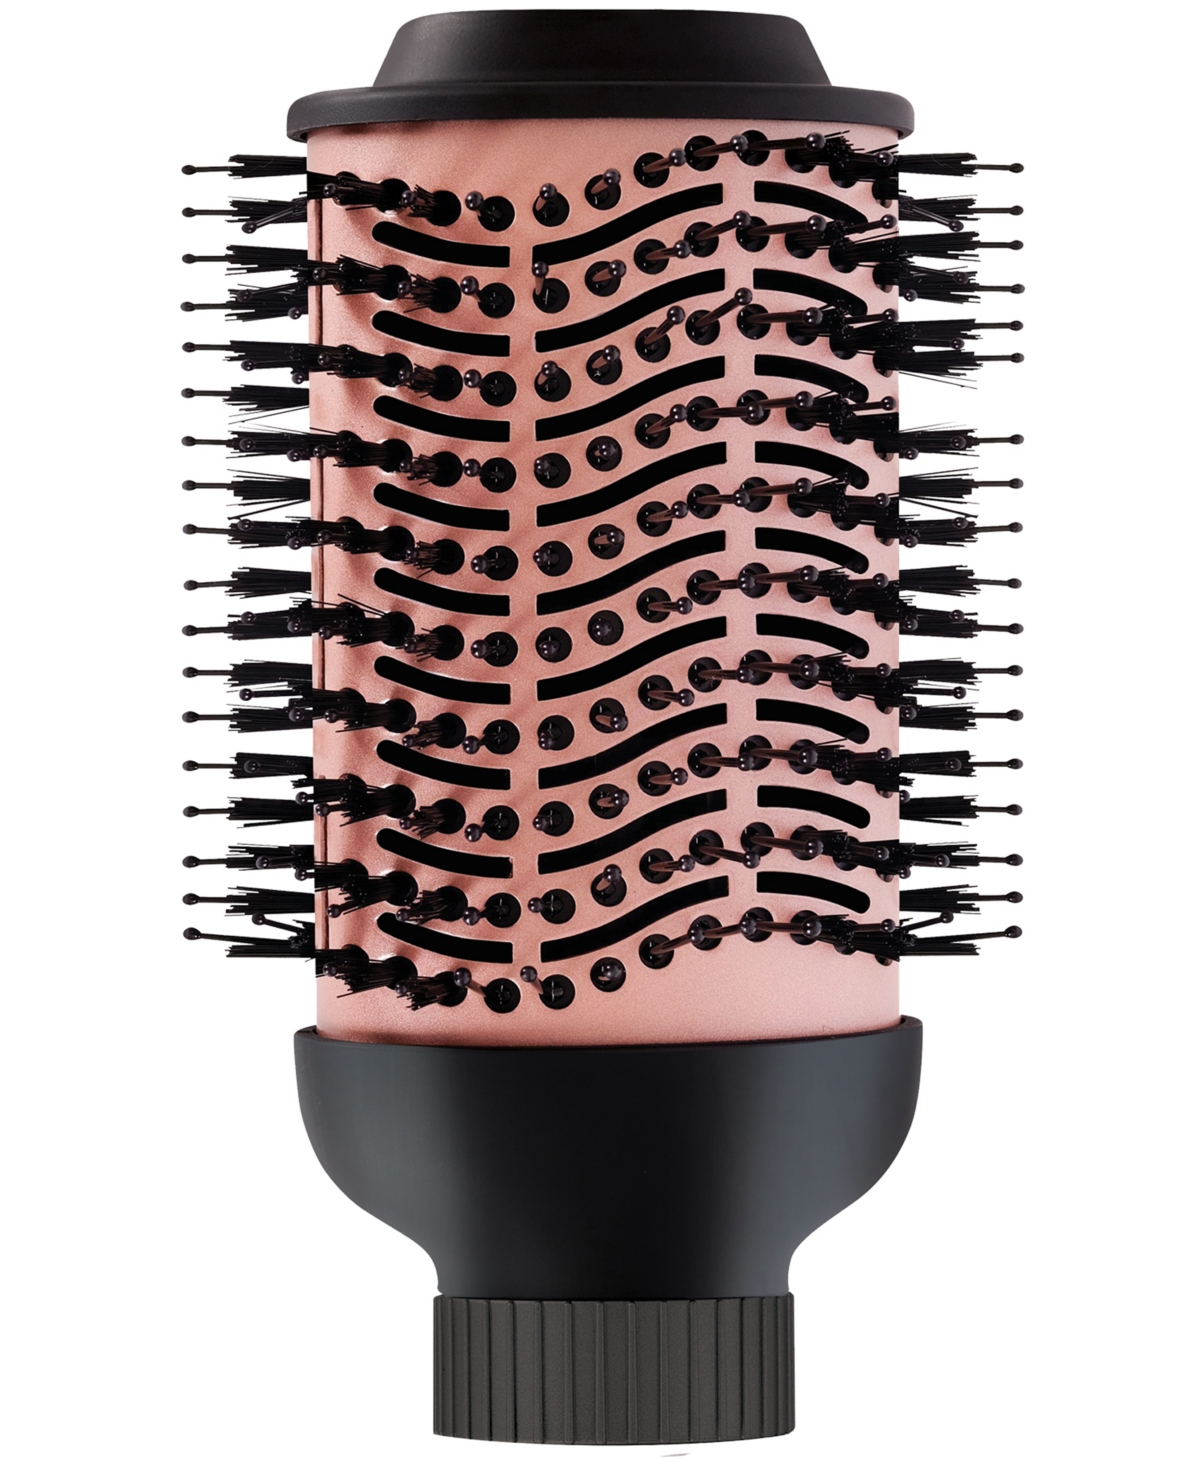 Sutra Beauty Interchangeable 3" Blowout Brush Head Attachment In Black And Rose Gold